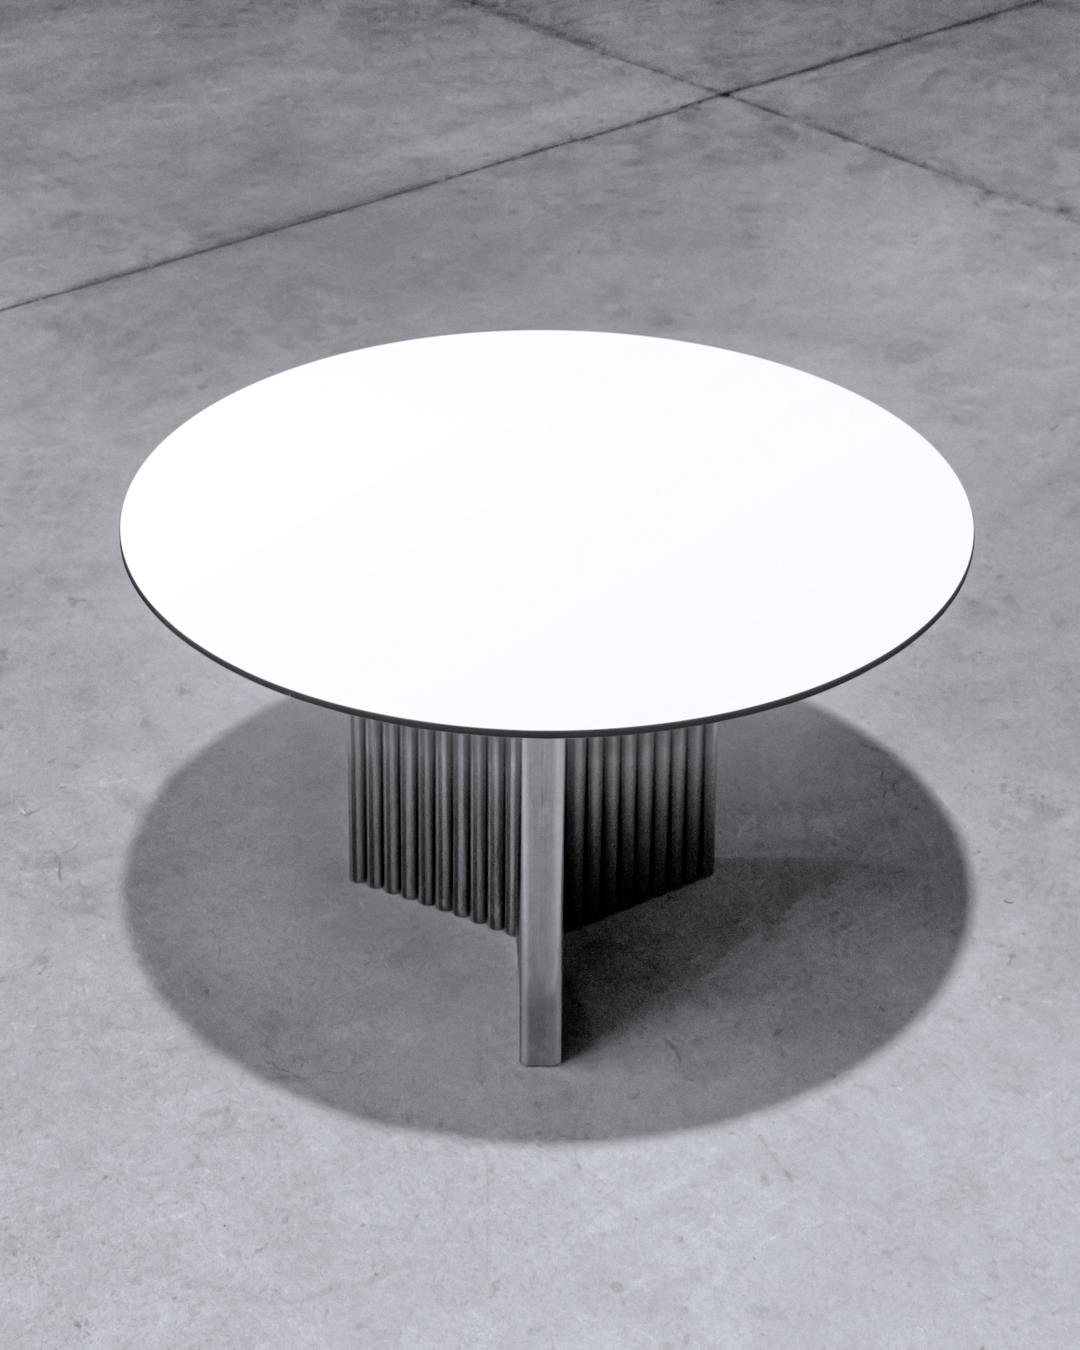 Temper table, made in italy, handmade objects